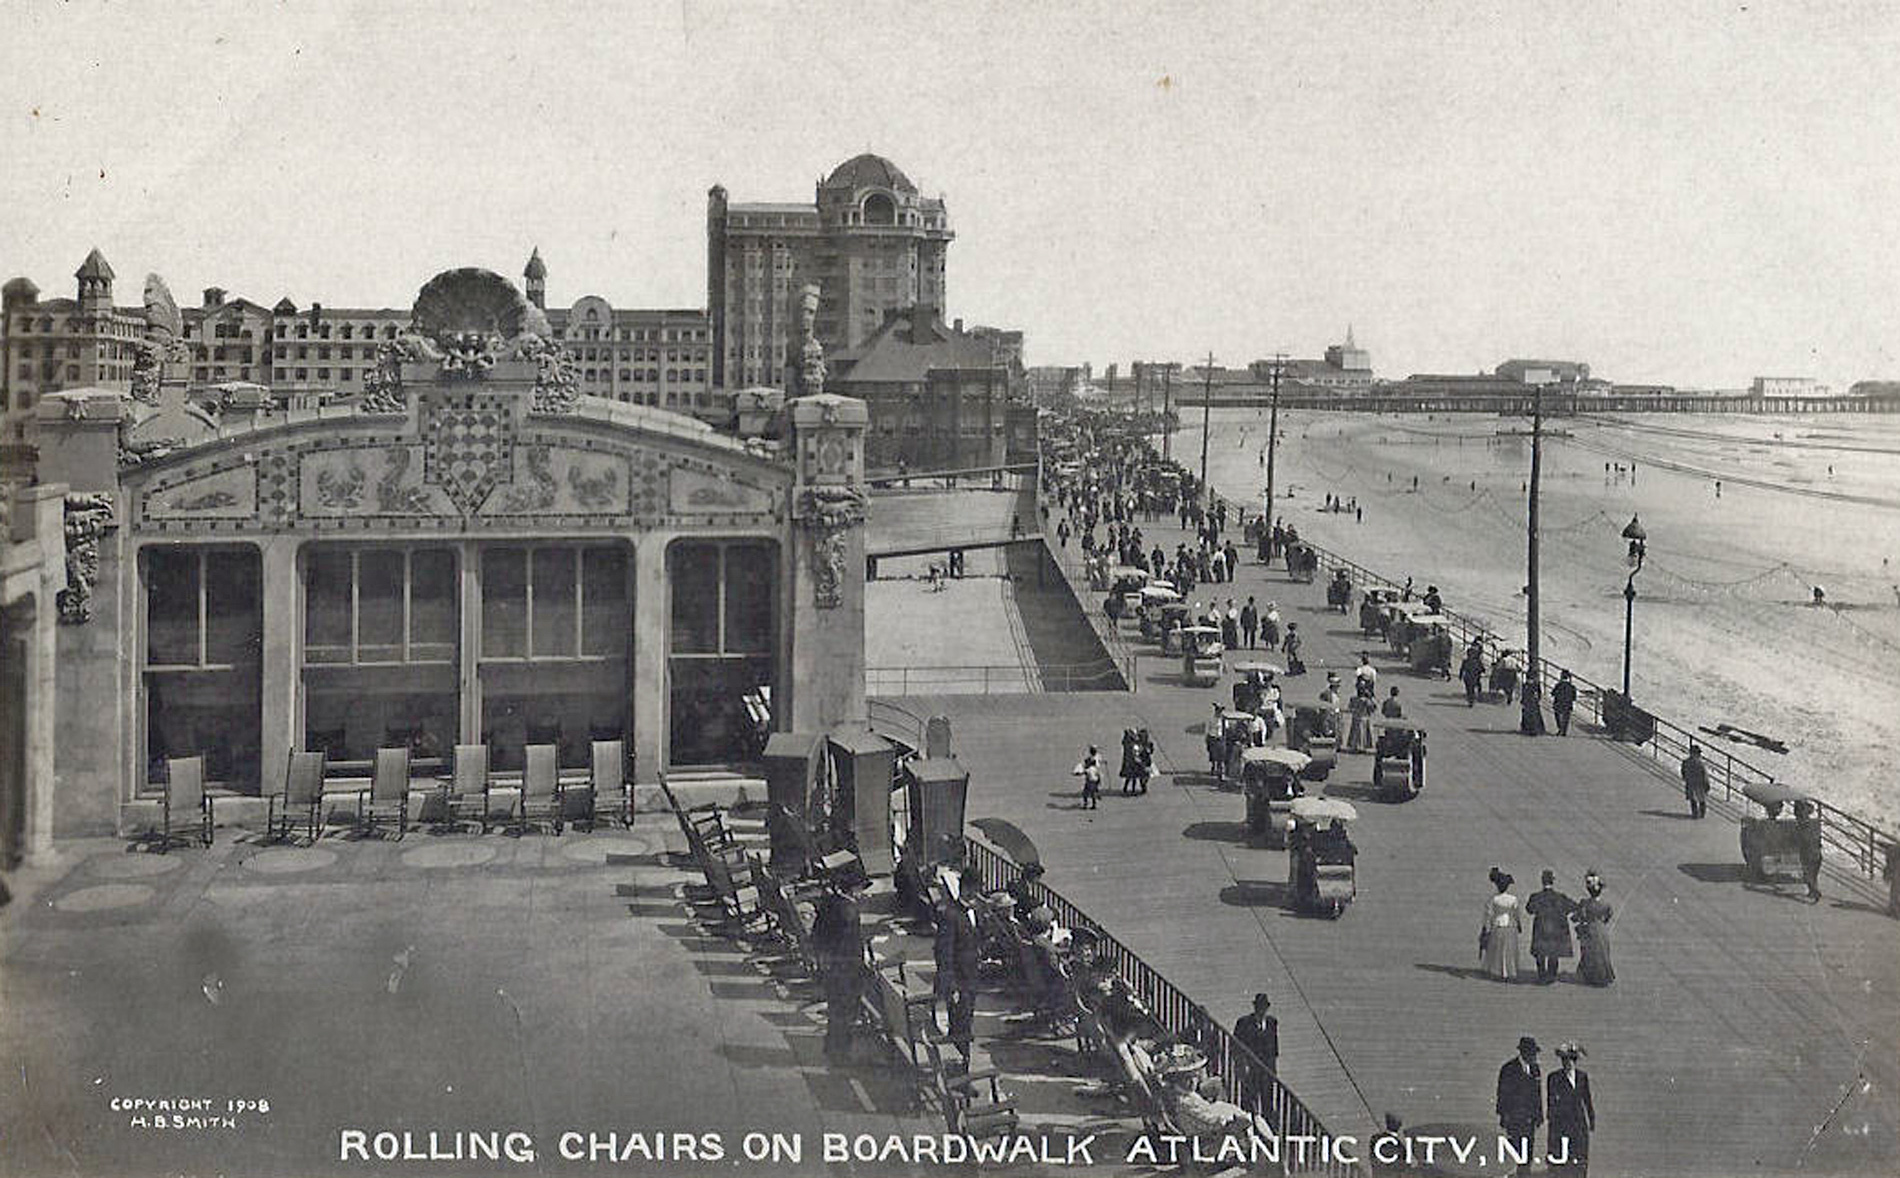 Atlantic City - Boardwalk view with rollingchairs